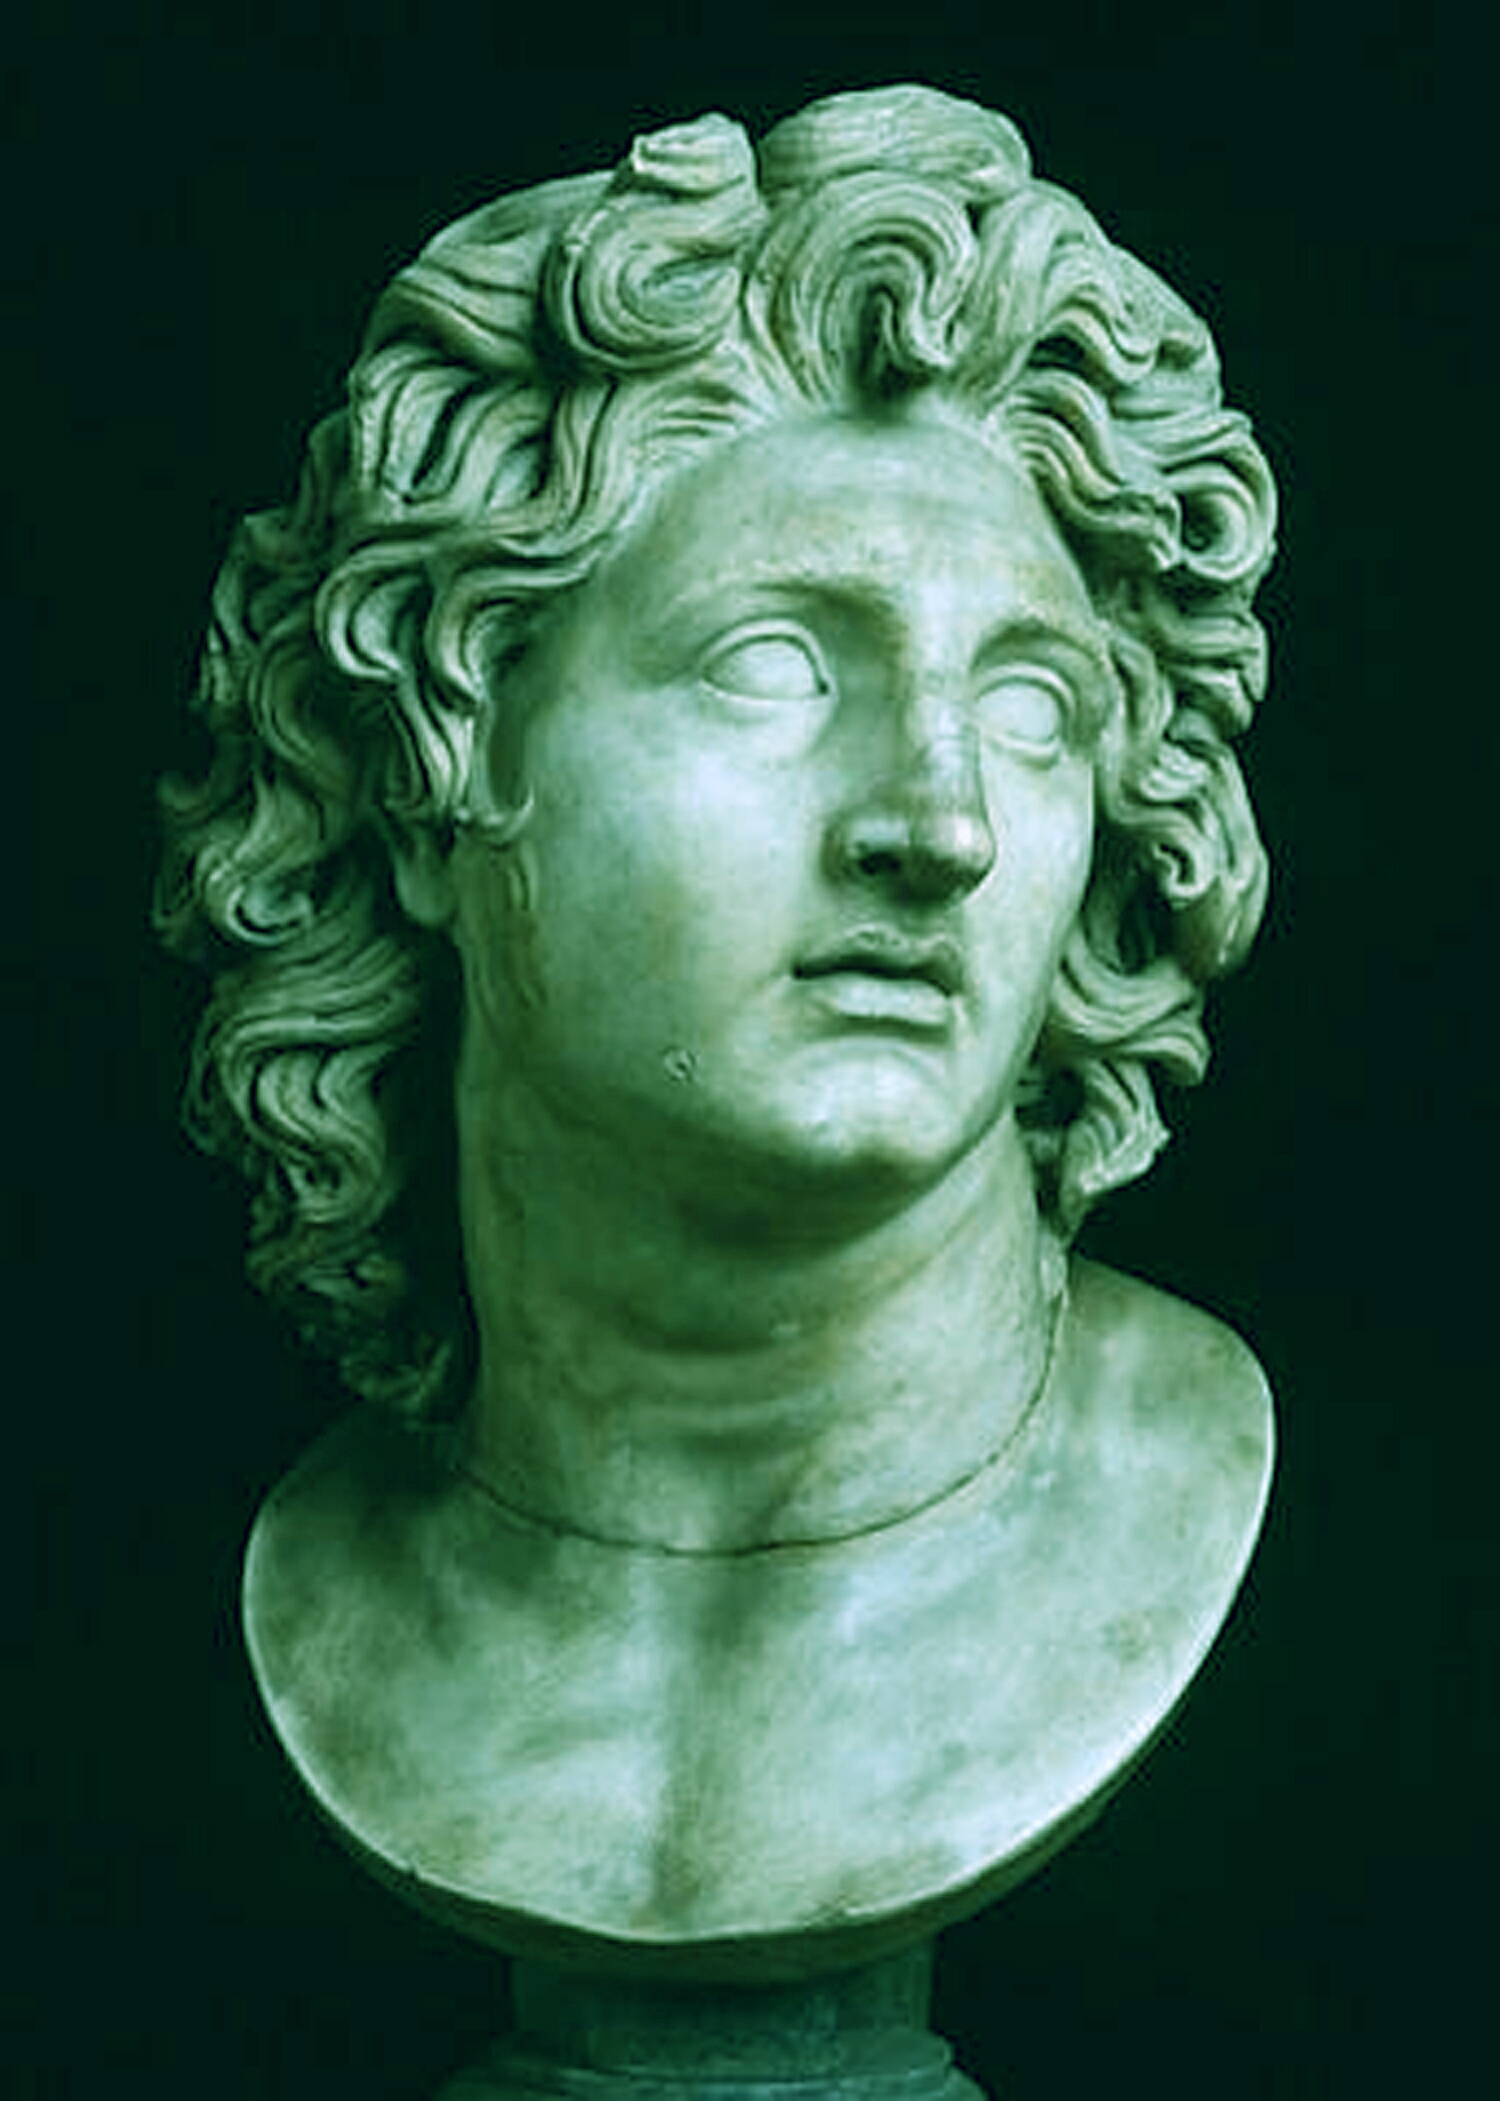 alexander the great bust